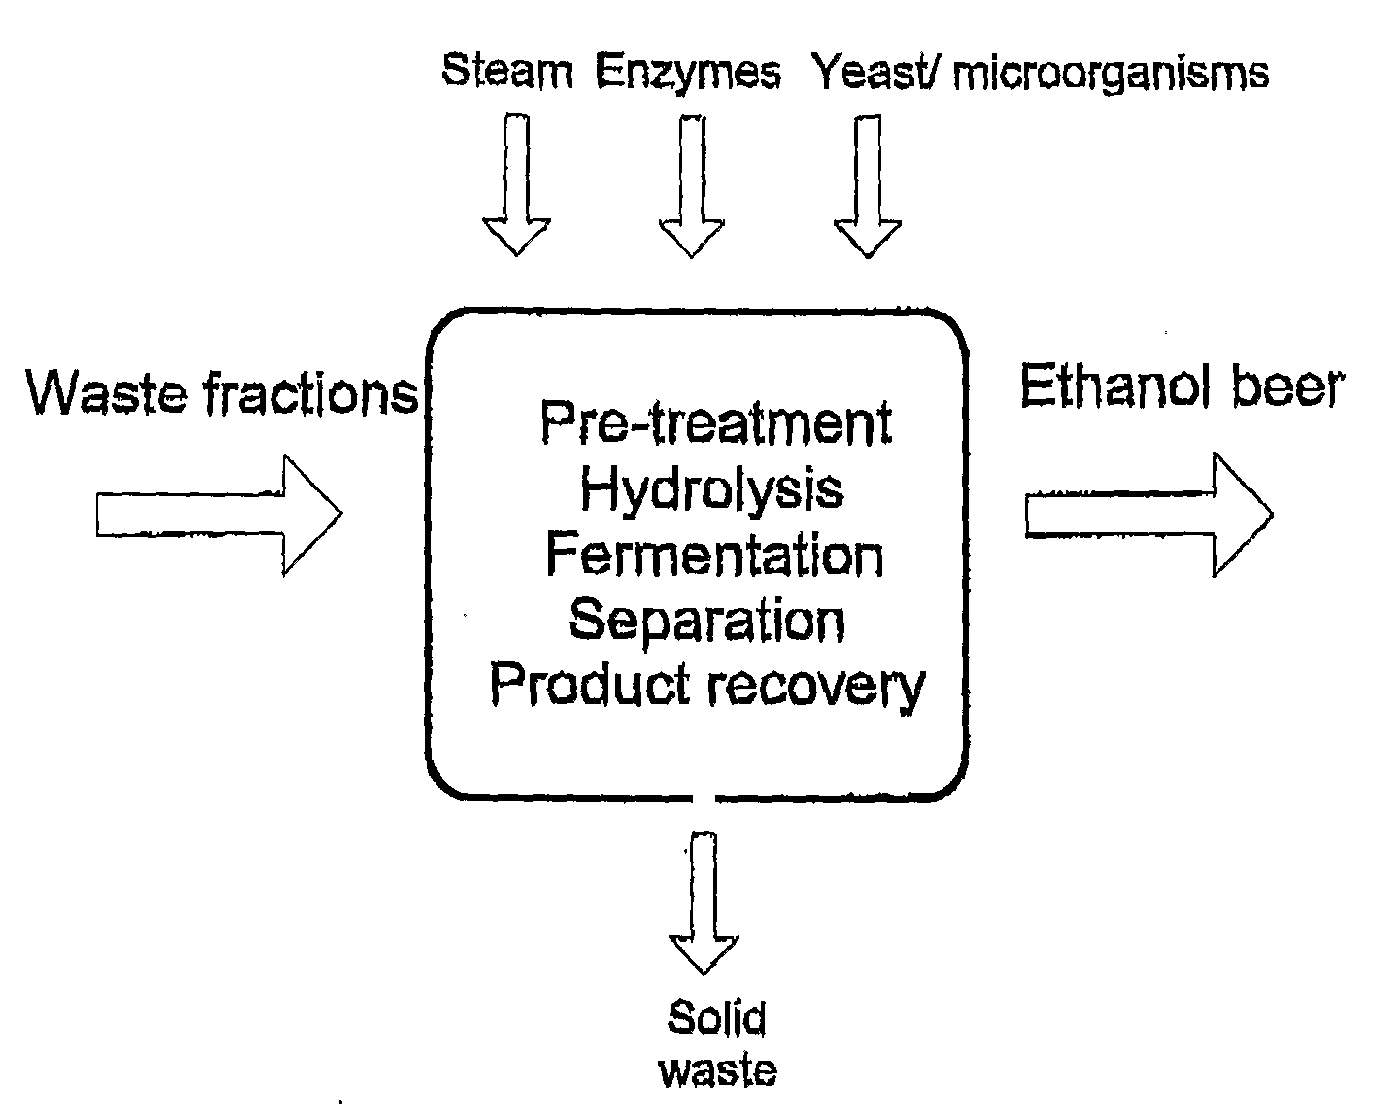 Non-Pressurised Pre-Treatment, Enzymatic Hydrolysis and Frementation of Waste Fractions